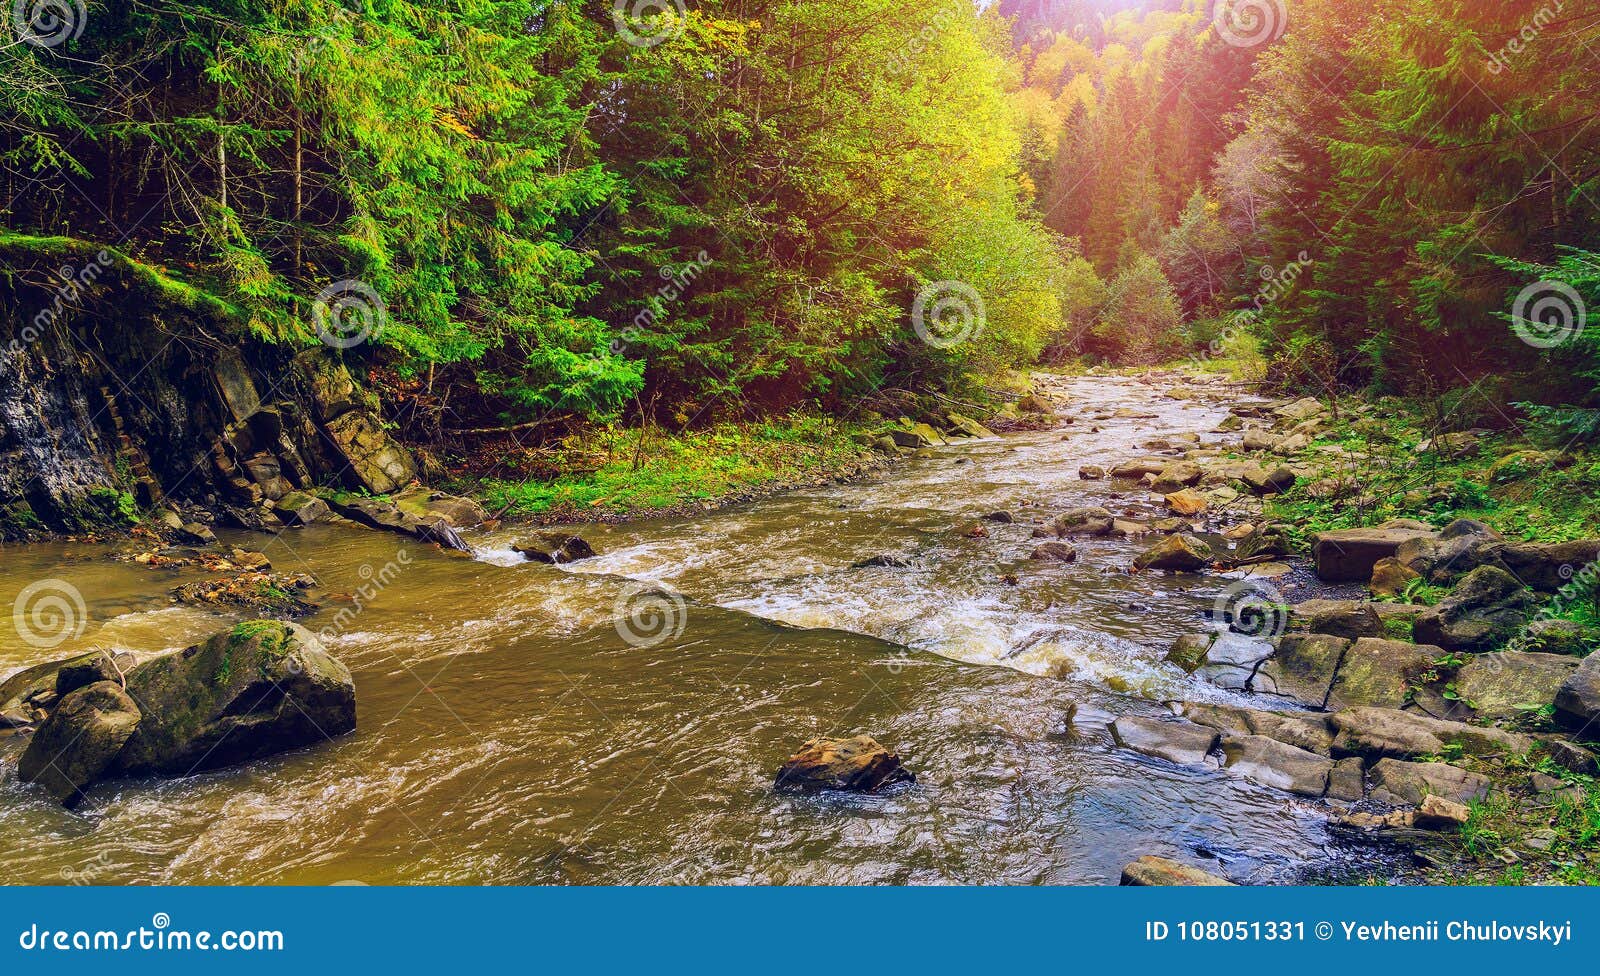 Beautyiful Autumh Landscape Small Mountain River Surrounded By Green